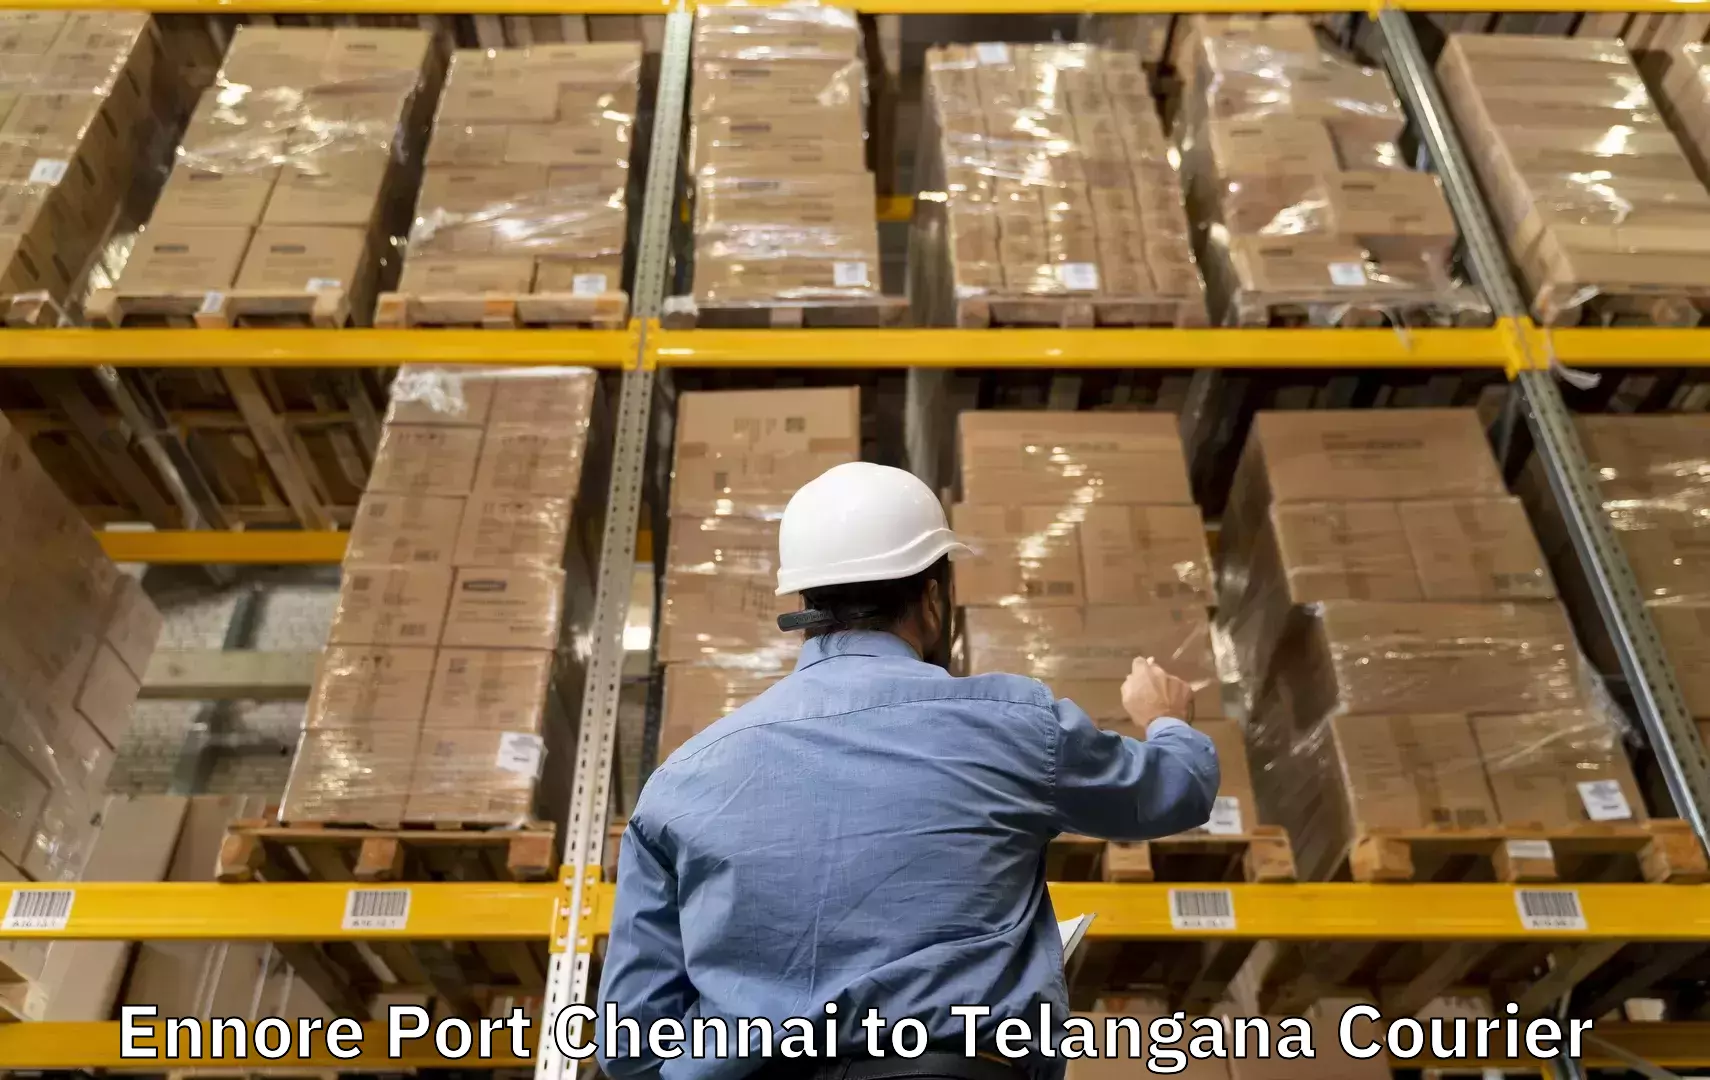 Luggage transport consultancy Ennore Port Chennai to Manopad